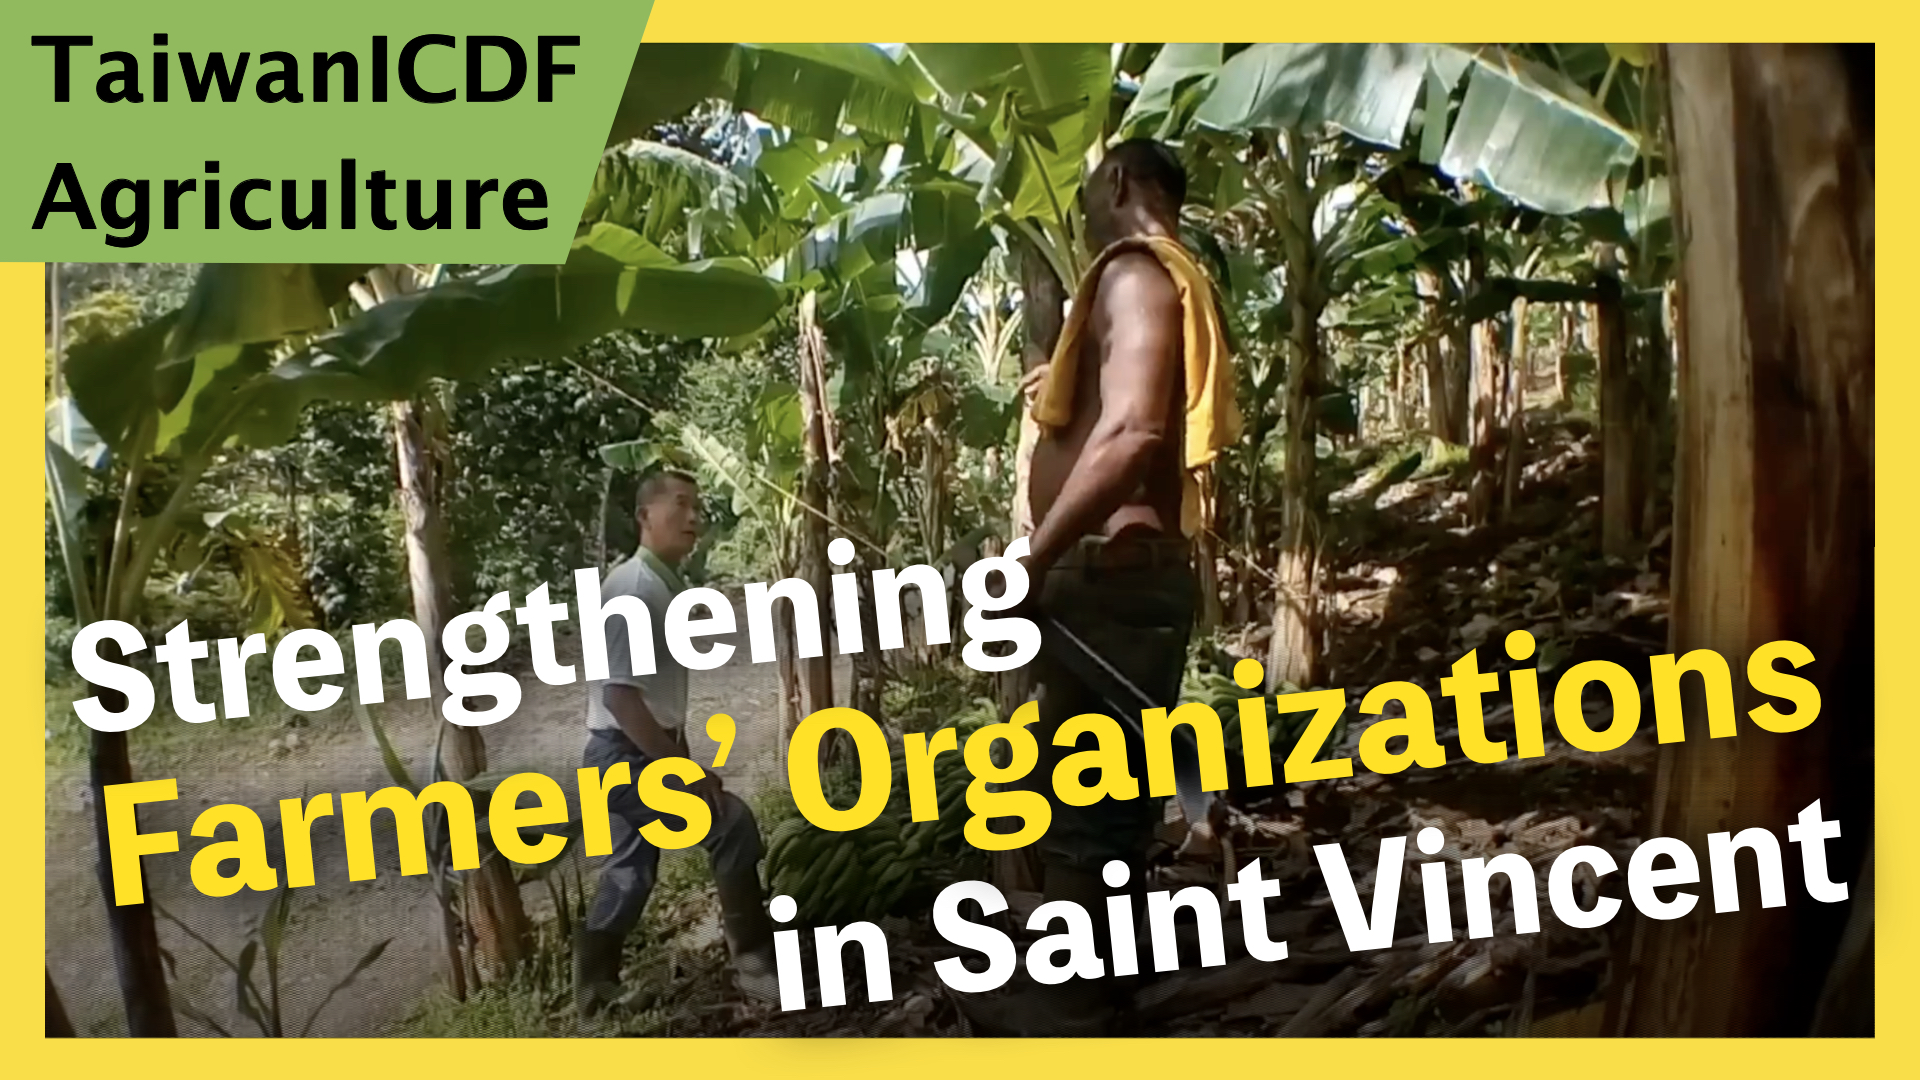 Project for Strengthening Farmers’ Organizations in Saint Vincent and the Grenadines